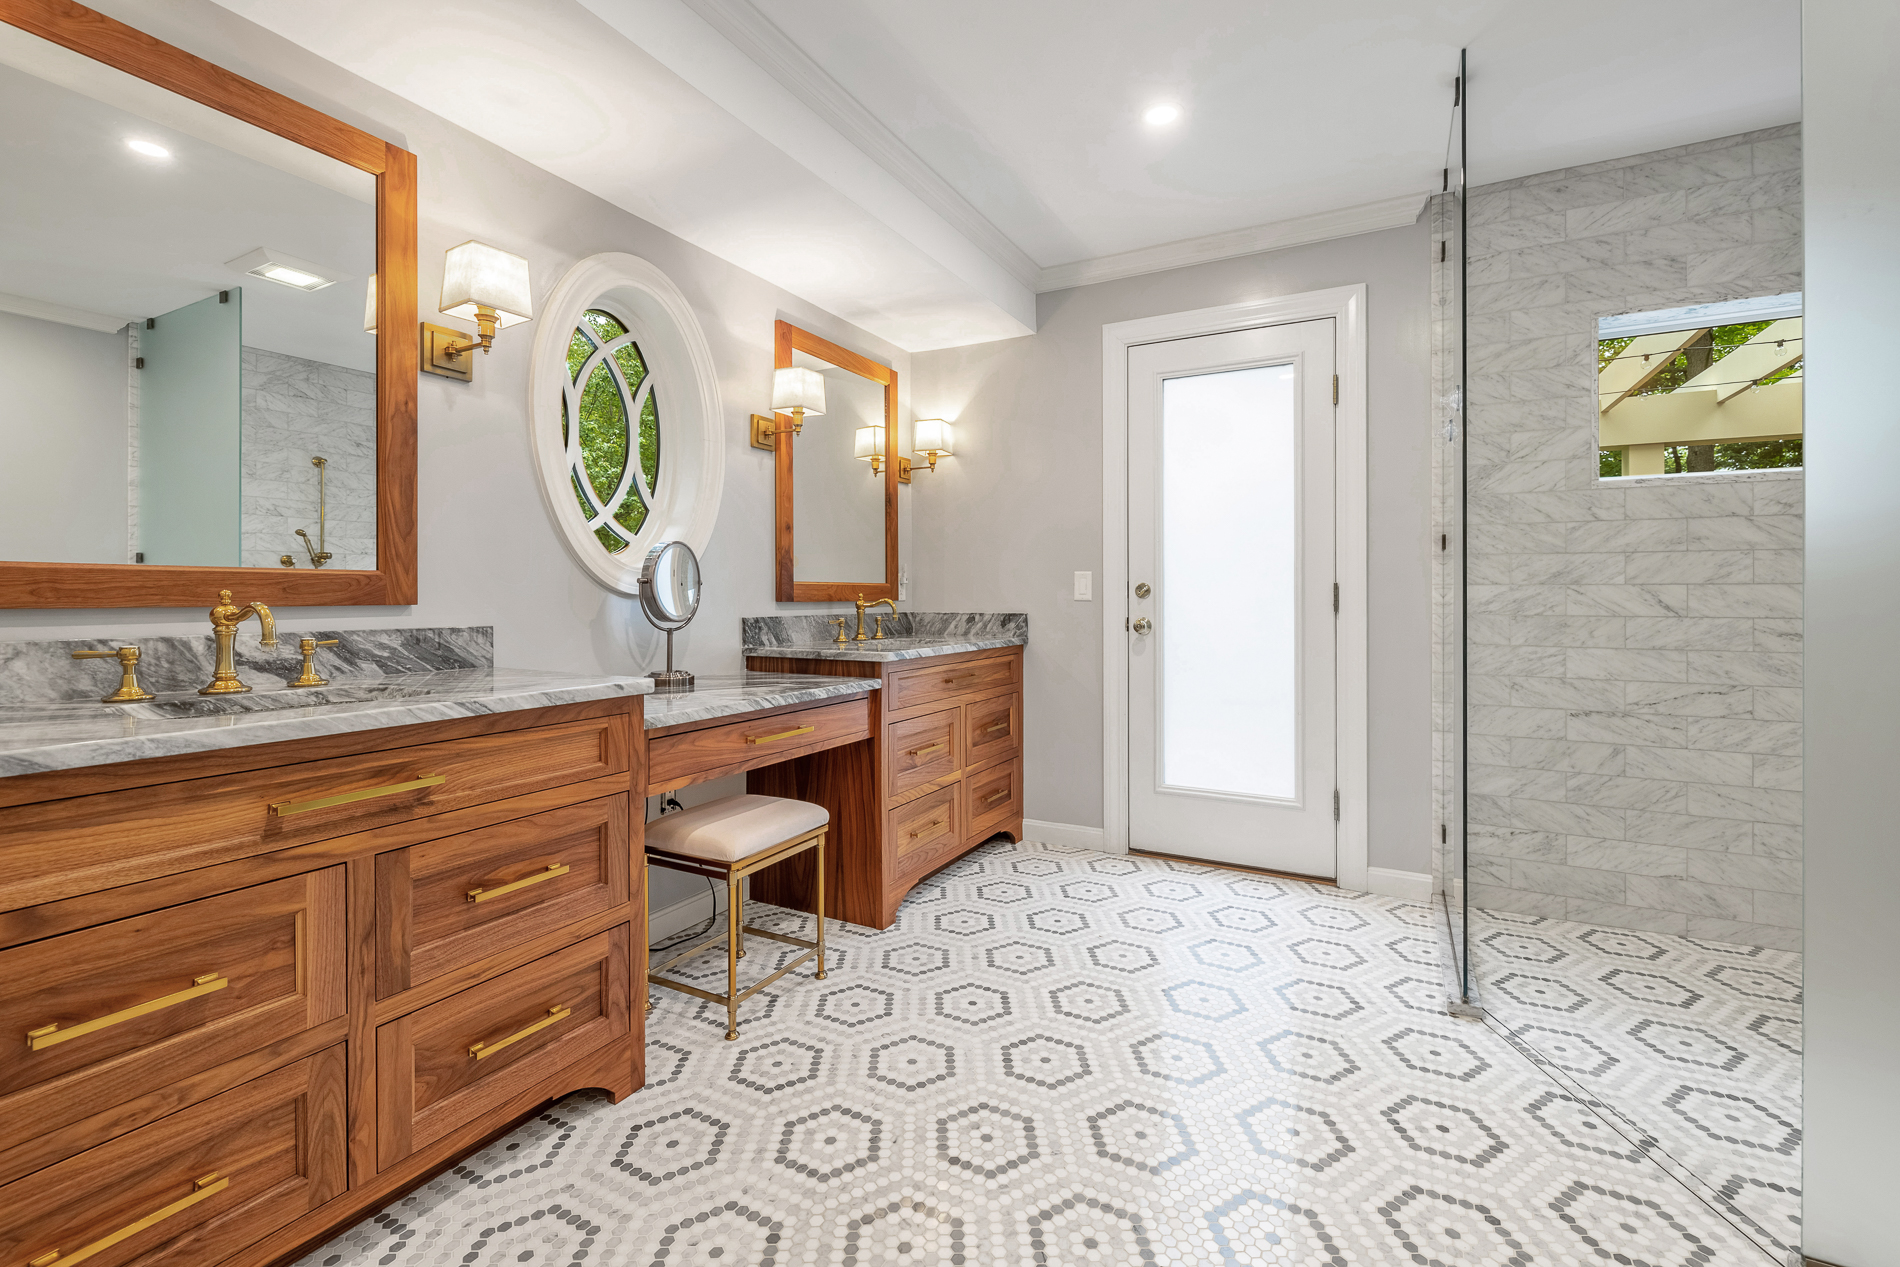 new bathroom design with an accessible walk-in shower, woodgrain cabinets and double vanity, tile patterned floor, round window, and recessed lighting.